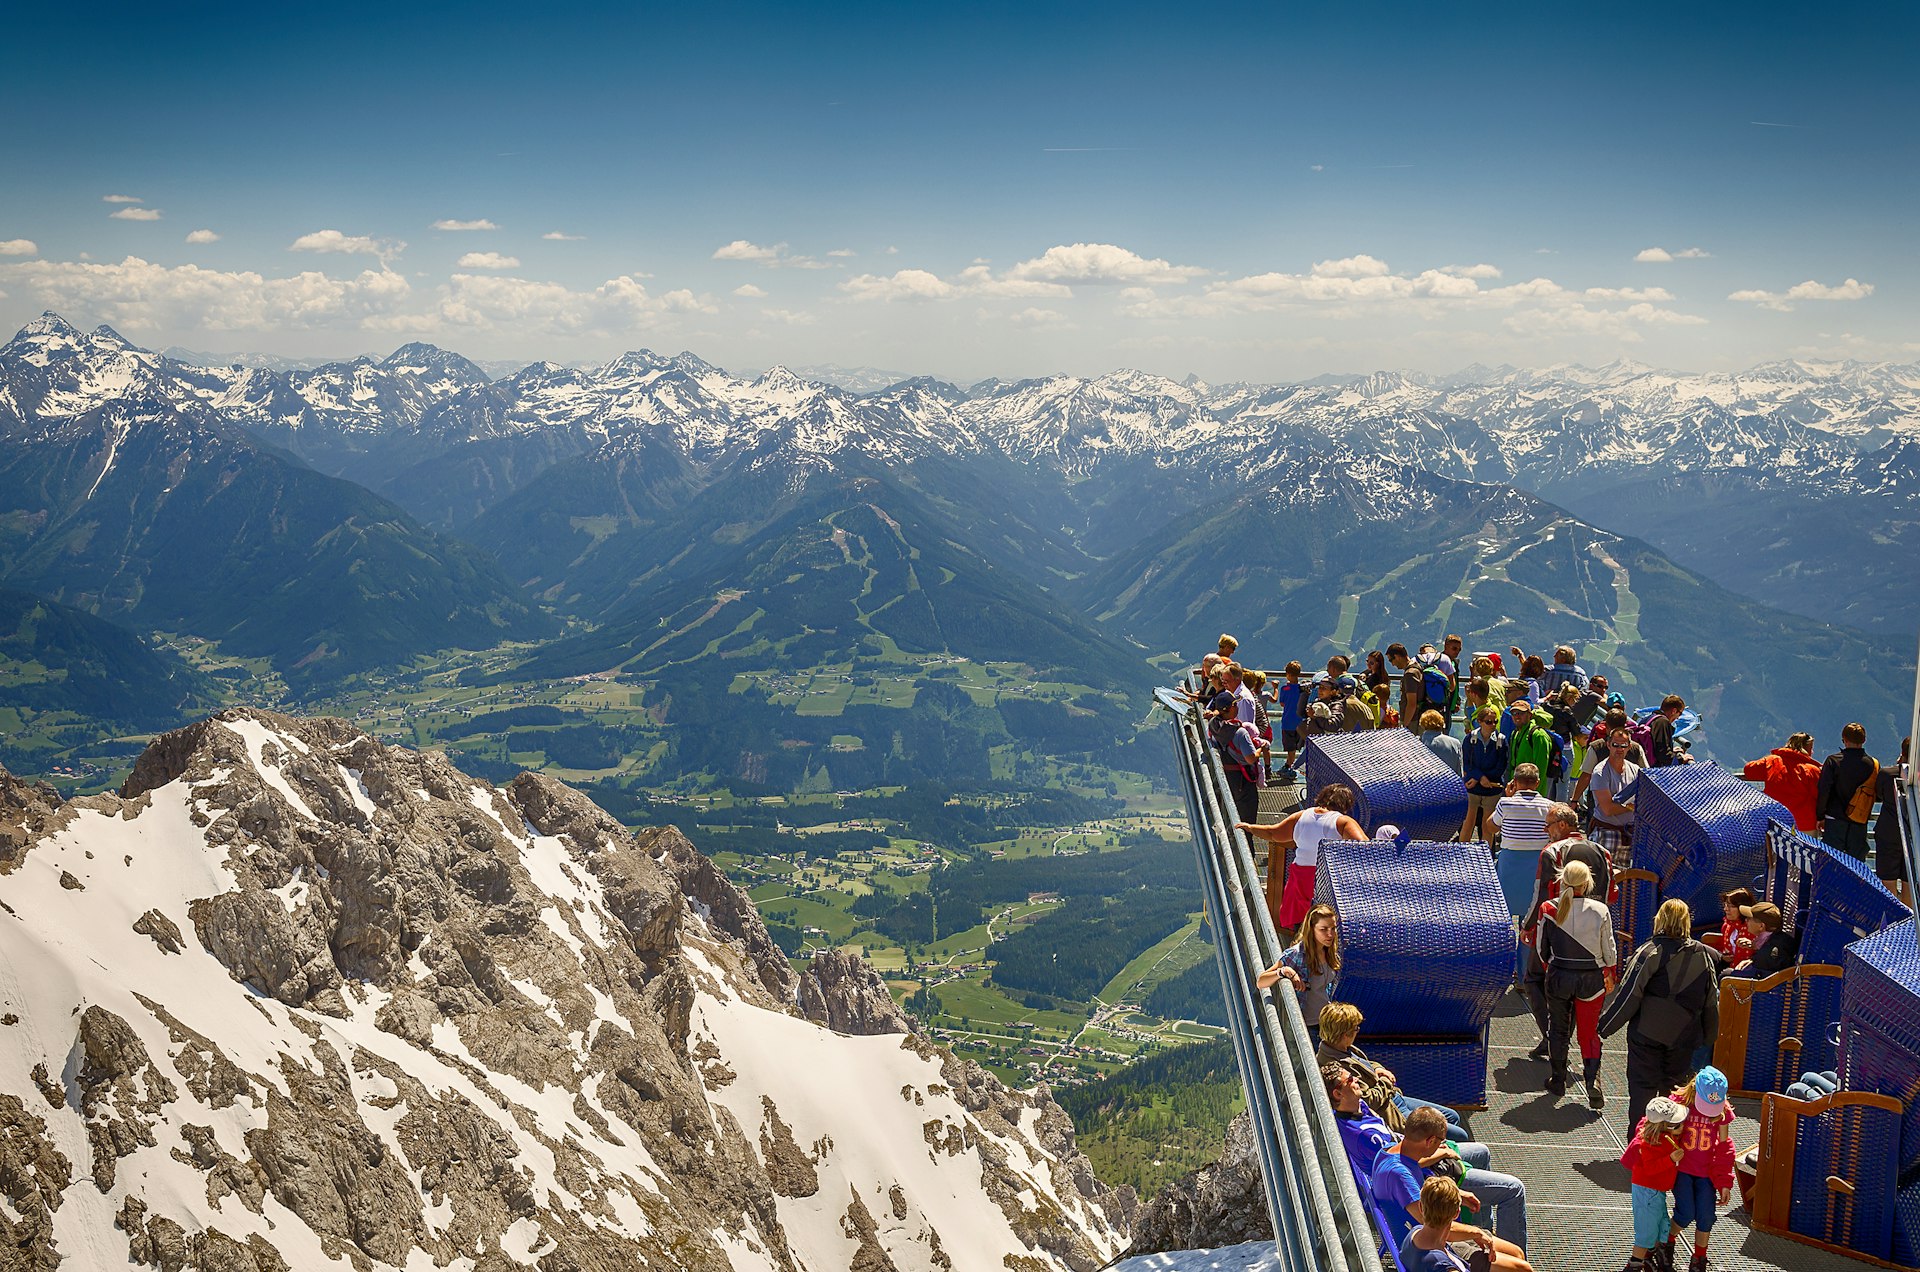 Tourists enjoying the breathtaking view from the extended Skywalk in Dachstein